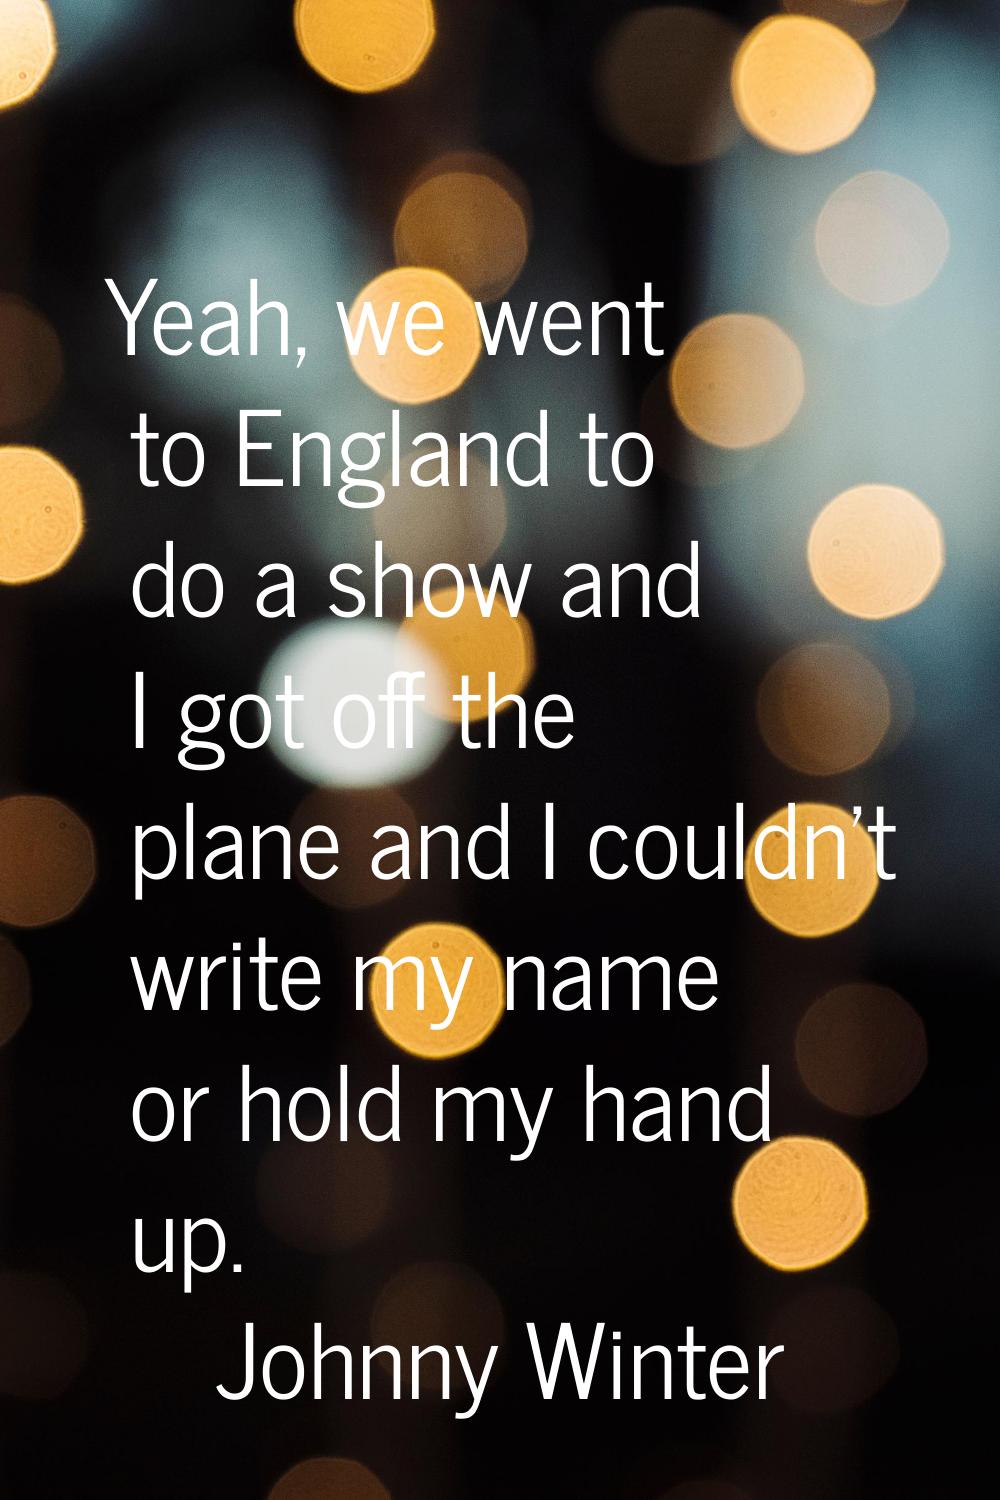 Yeah, we went to England to do a show and I got off the plane and I couldn't write my name or hold 